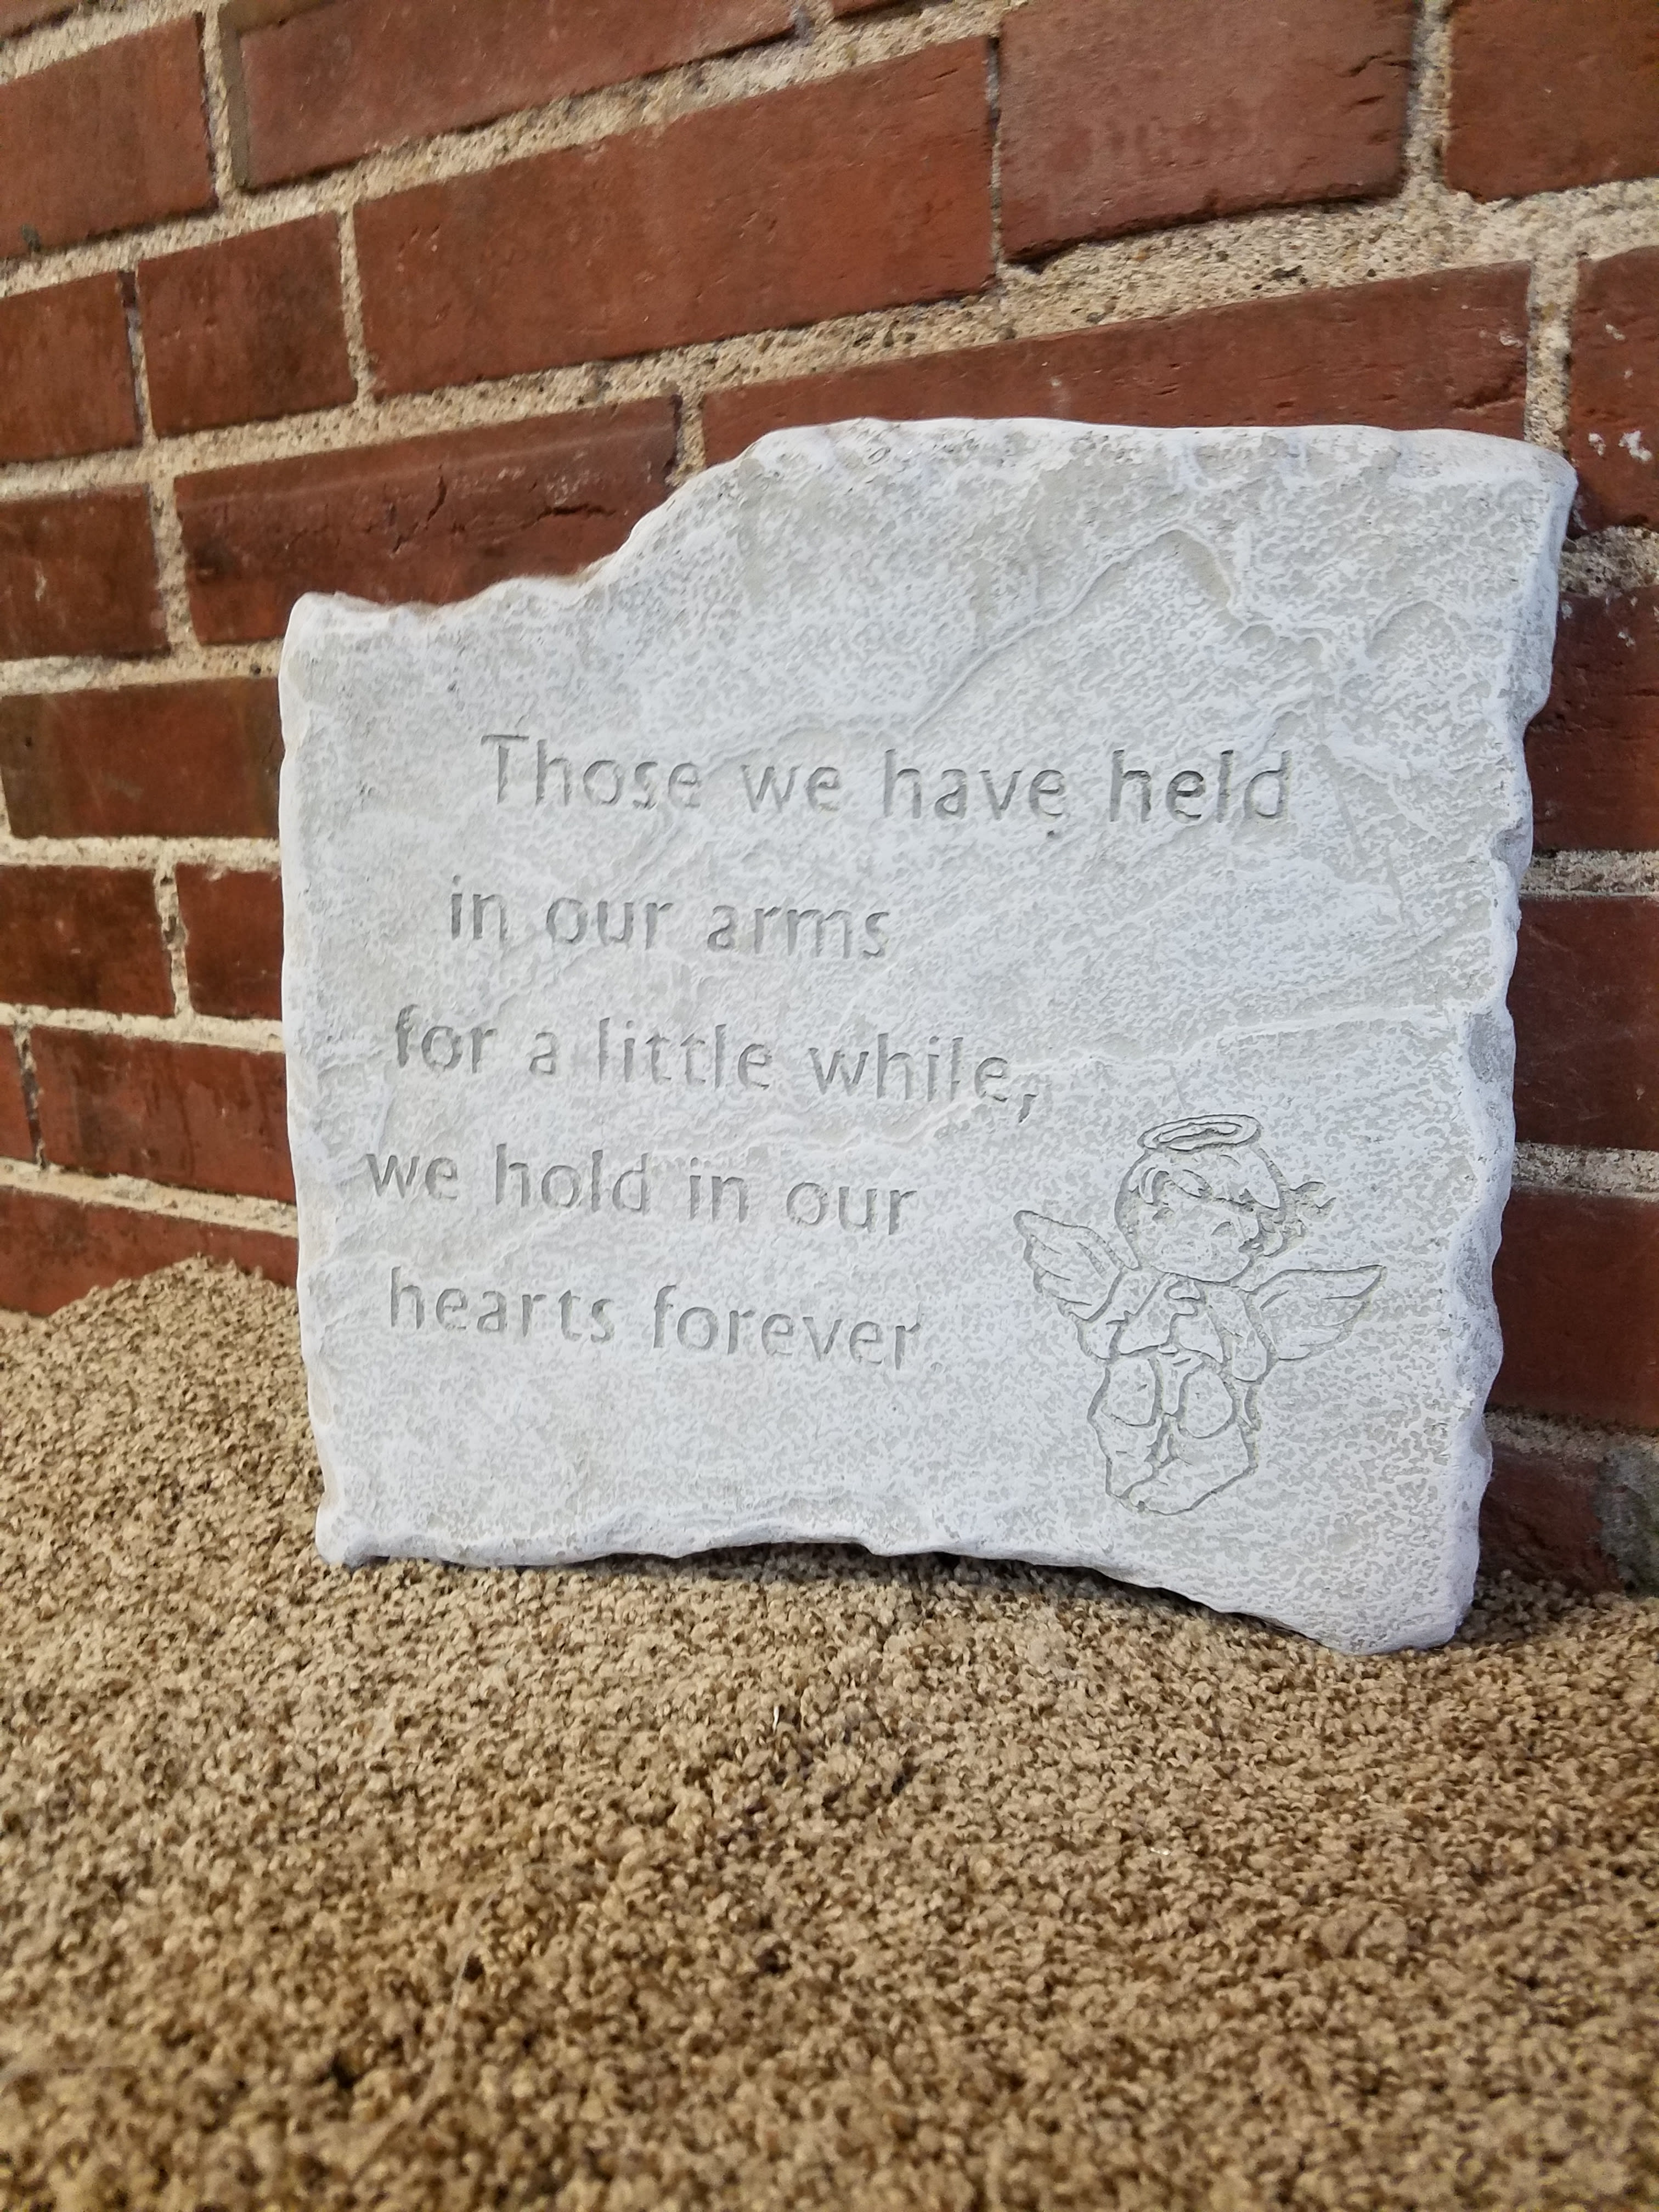 Eckert Florist's &quot;Those we have held...&quot; Memorial Stone *LOCAL DELIVERY ONLY* - &quot;Those we have held on our arms for a while, we hold in our hearts forever.&quot;  ALL OF OUR STONES COME DECORATED WITH A SHEER BOW, WILLOW, RAFIA, AND OUR SIGNATURE BIRD.  *NOTICE* Please call before ordering stones. Due to high demand, we may not have this particular stone in stock. If you would like to make sure we have this exact stone please call us at 618-233-9970. Or let us know in the order notes if something similar is ok.